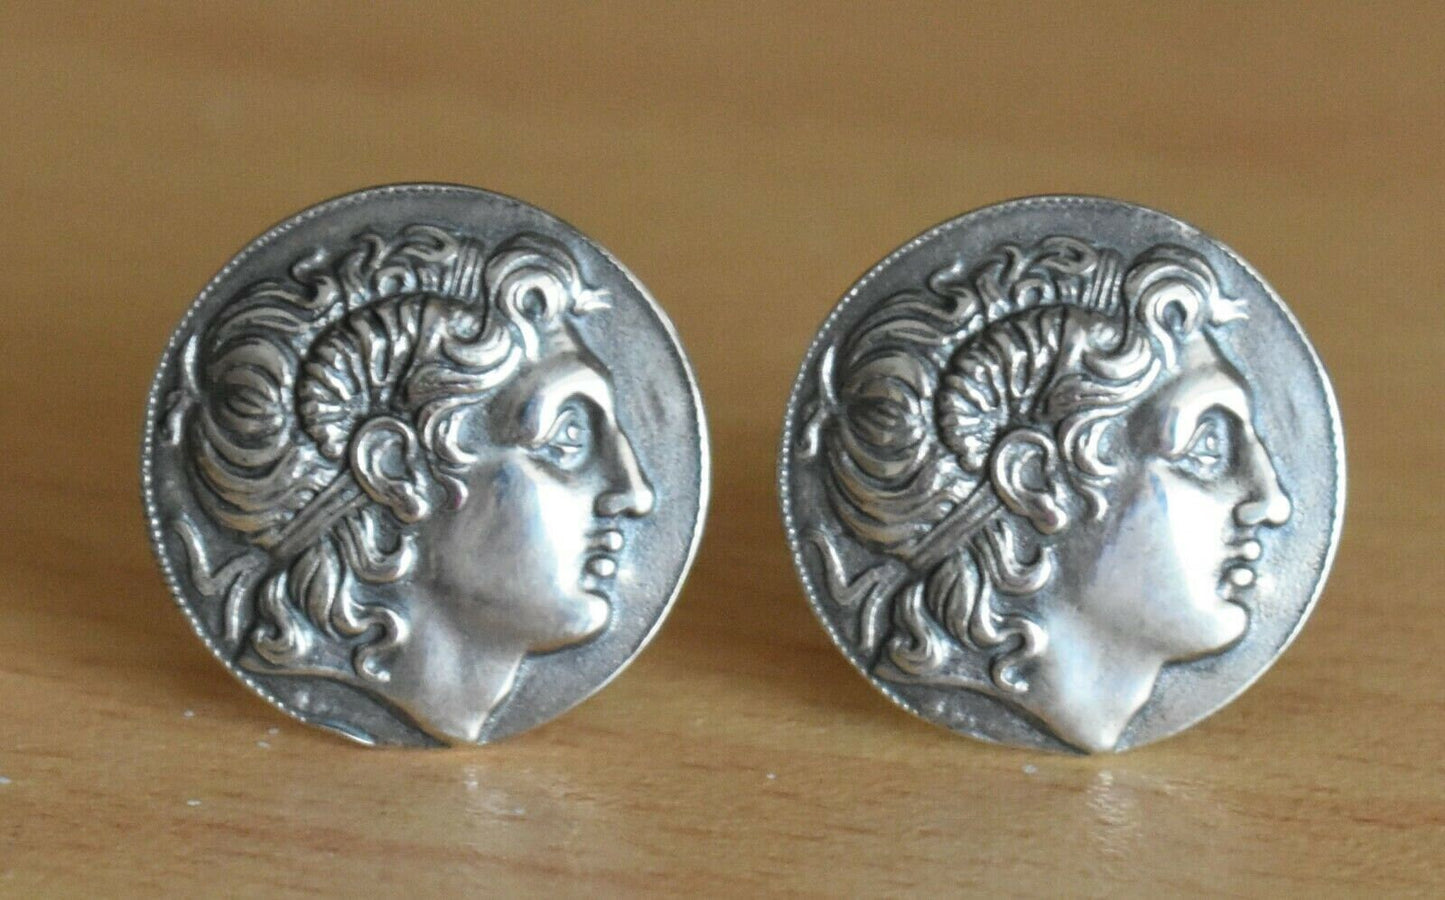 Alexander The Great - Macedonian King - Son of Philip, Student of Aristoteles - Lysimachos - Cufflinks  - 925 Sterling Silver